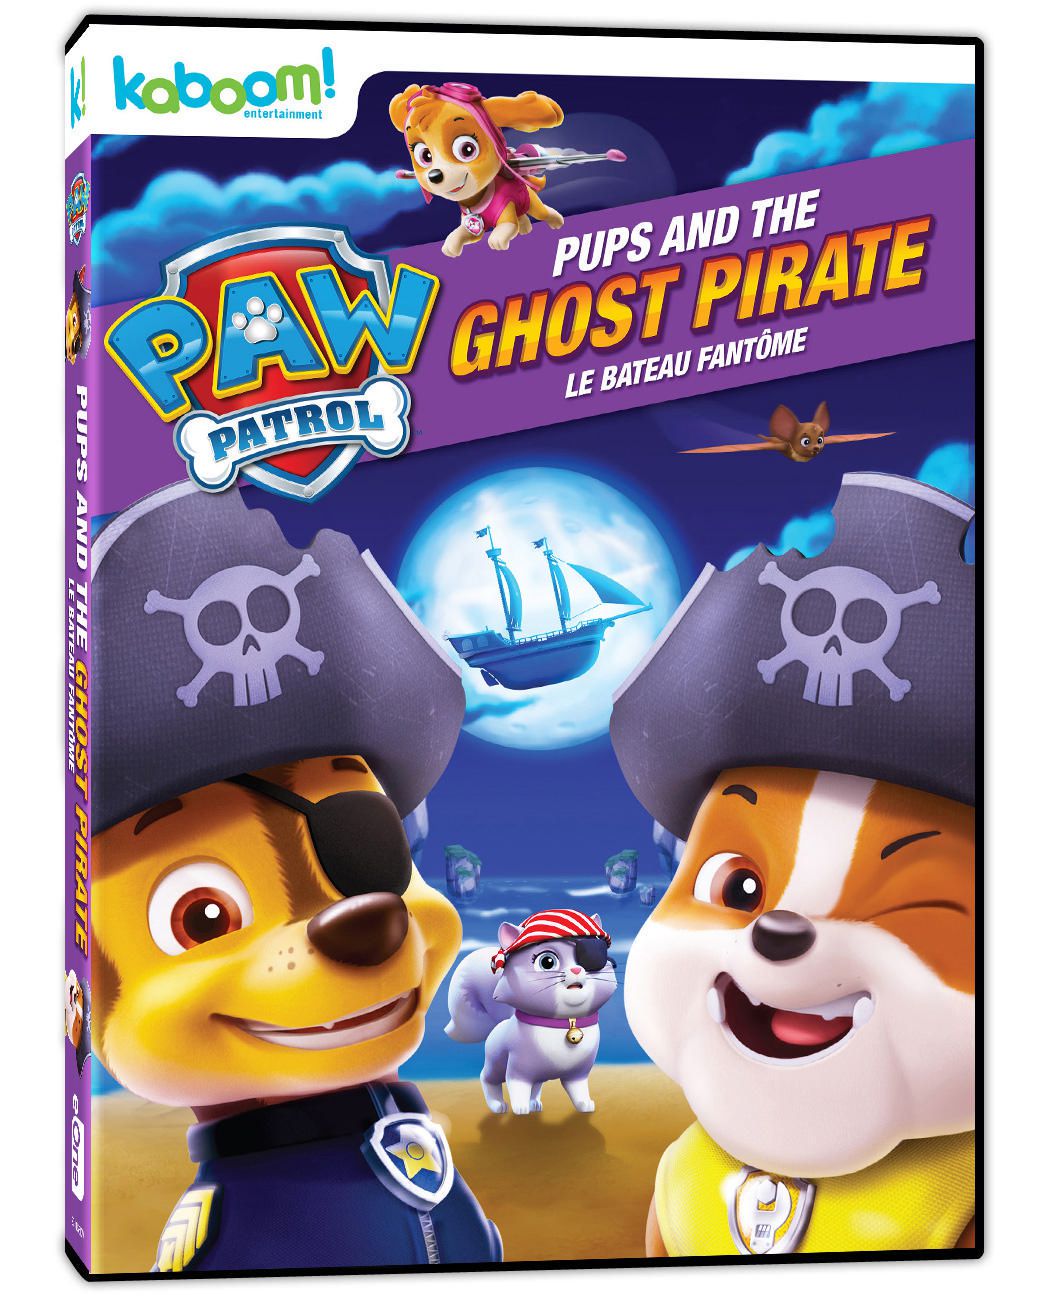 PAW Patrol - Pups and the Ghost Pirate DVD (Bilingual) | Walmart Canada